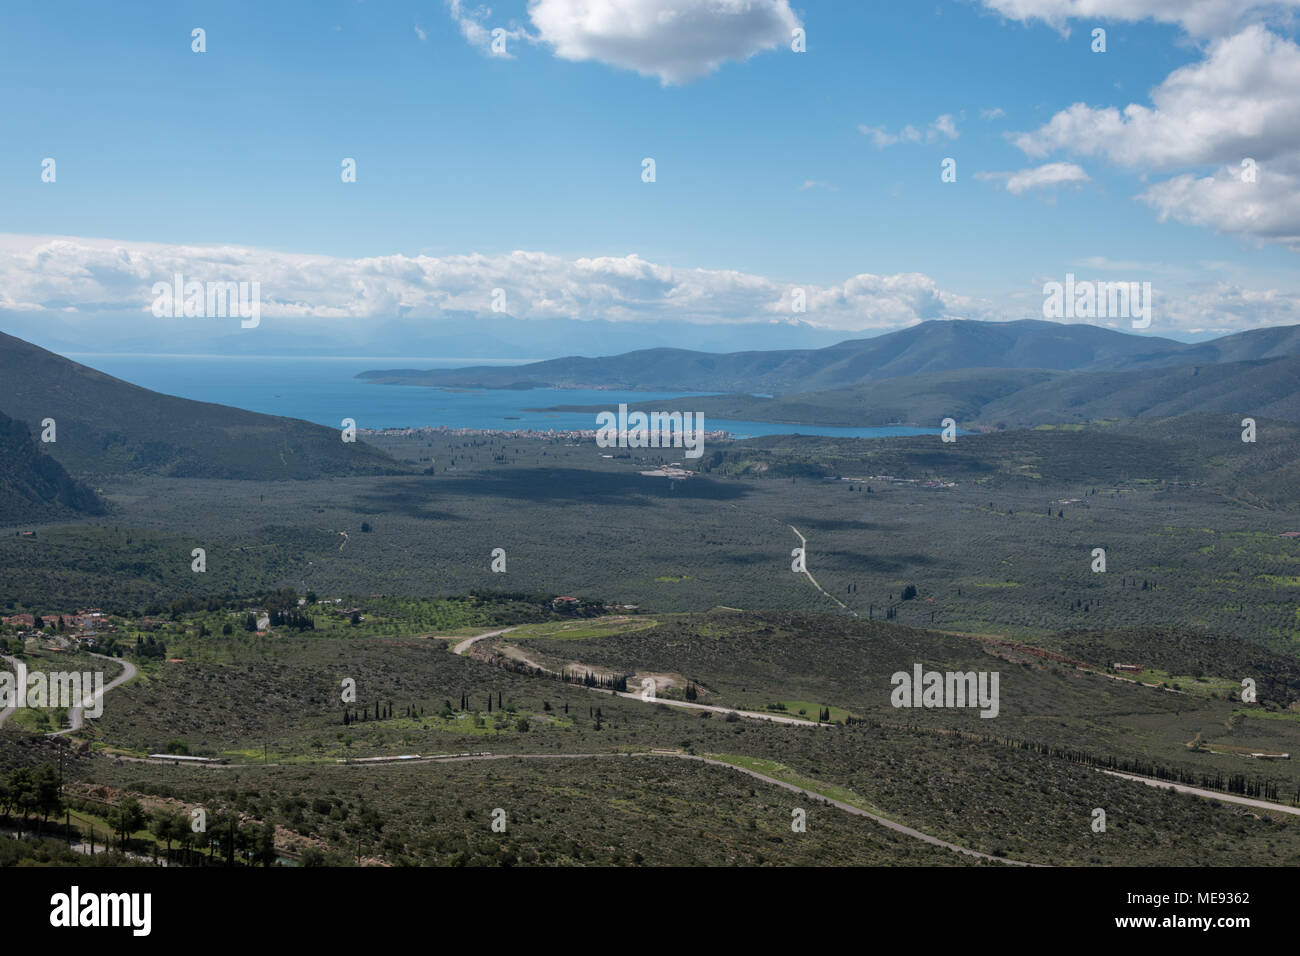 The view of Itea in Greece from Delphi on a sunny day with some clouds in the sky. The Peloponnese is also visible. Stock Photo